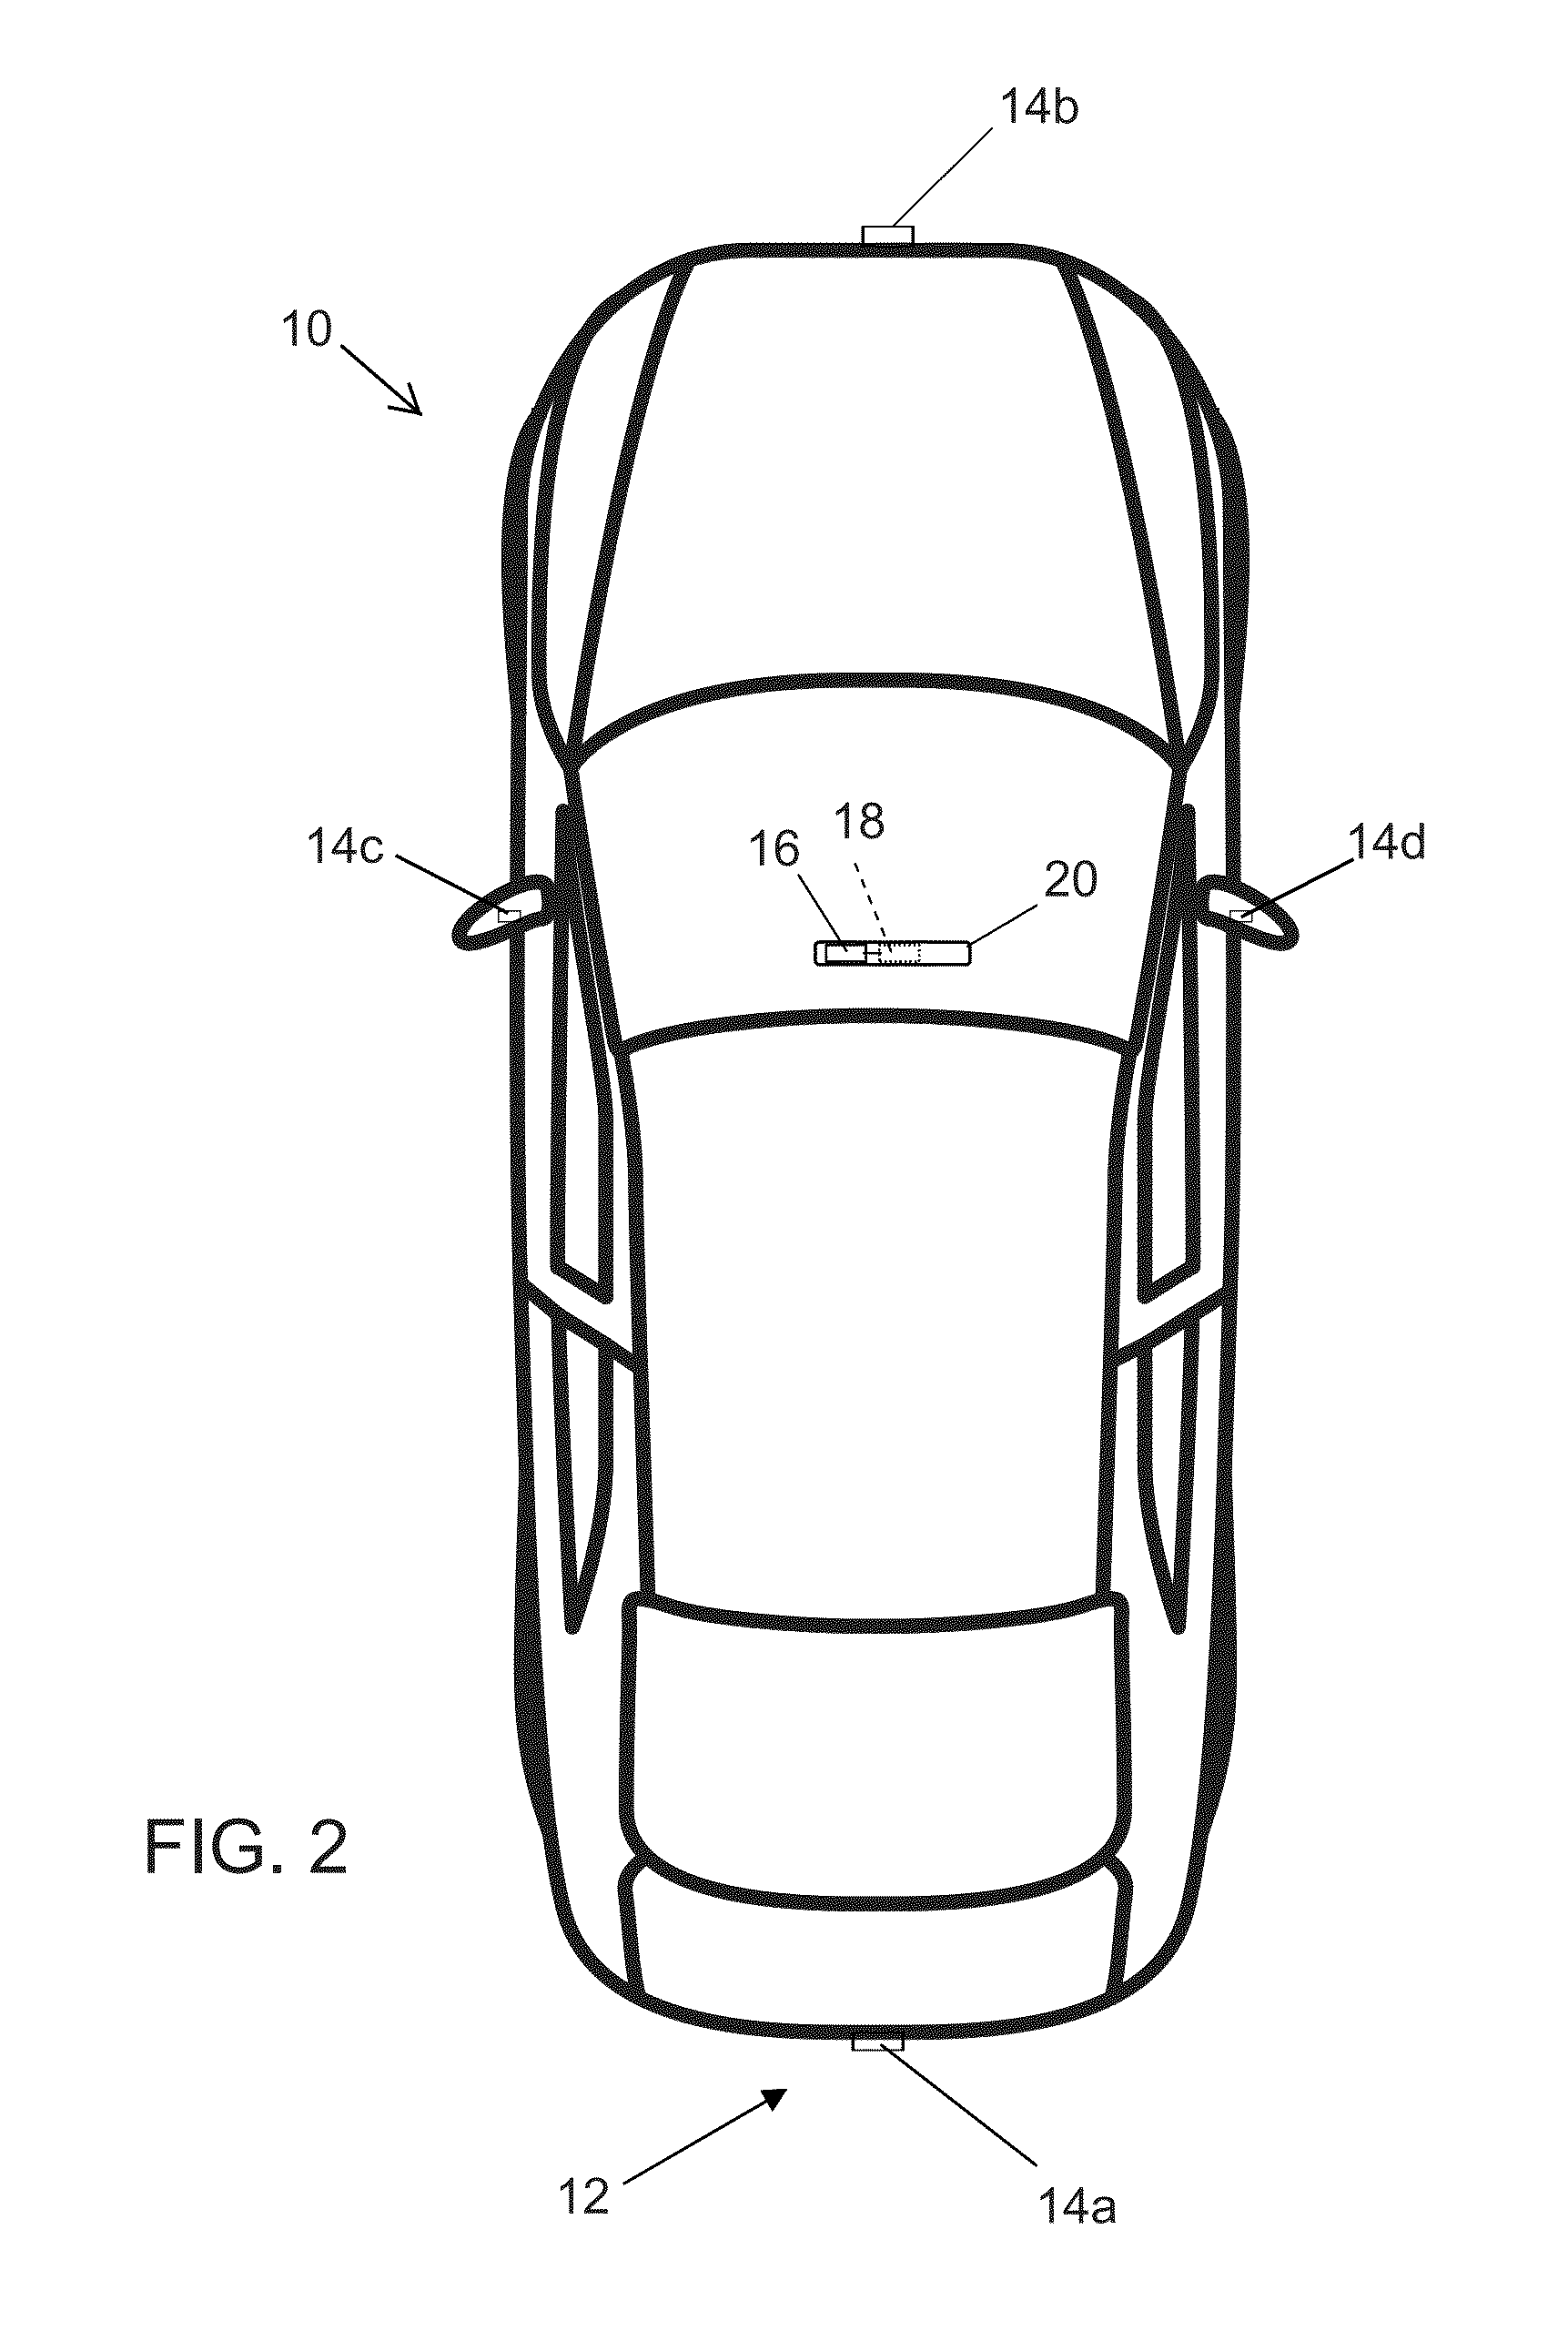 Vehicle camera with connector system for high speed transmission